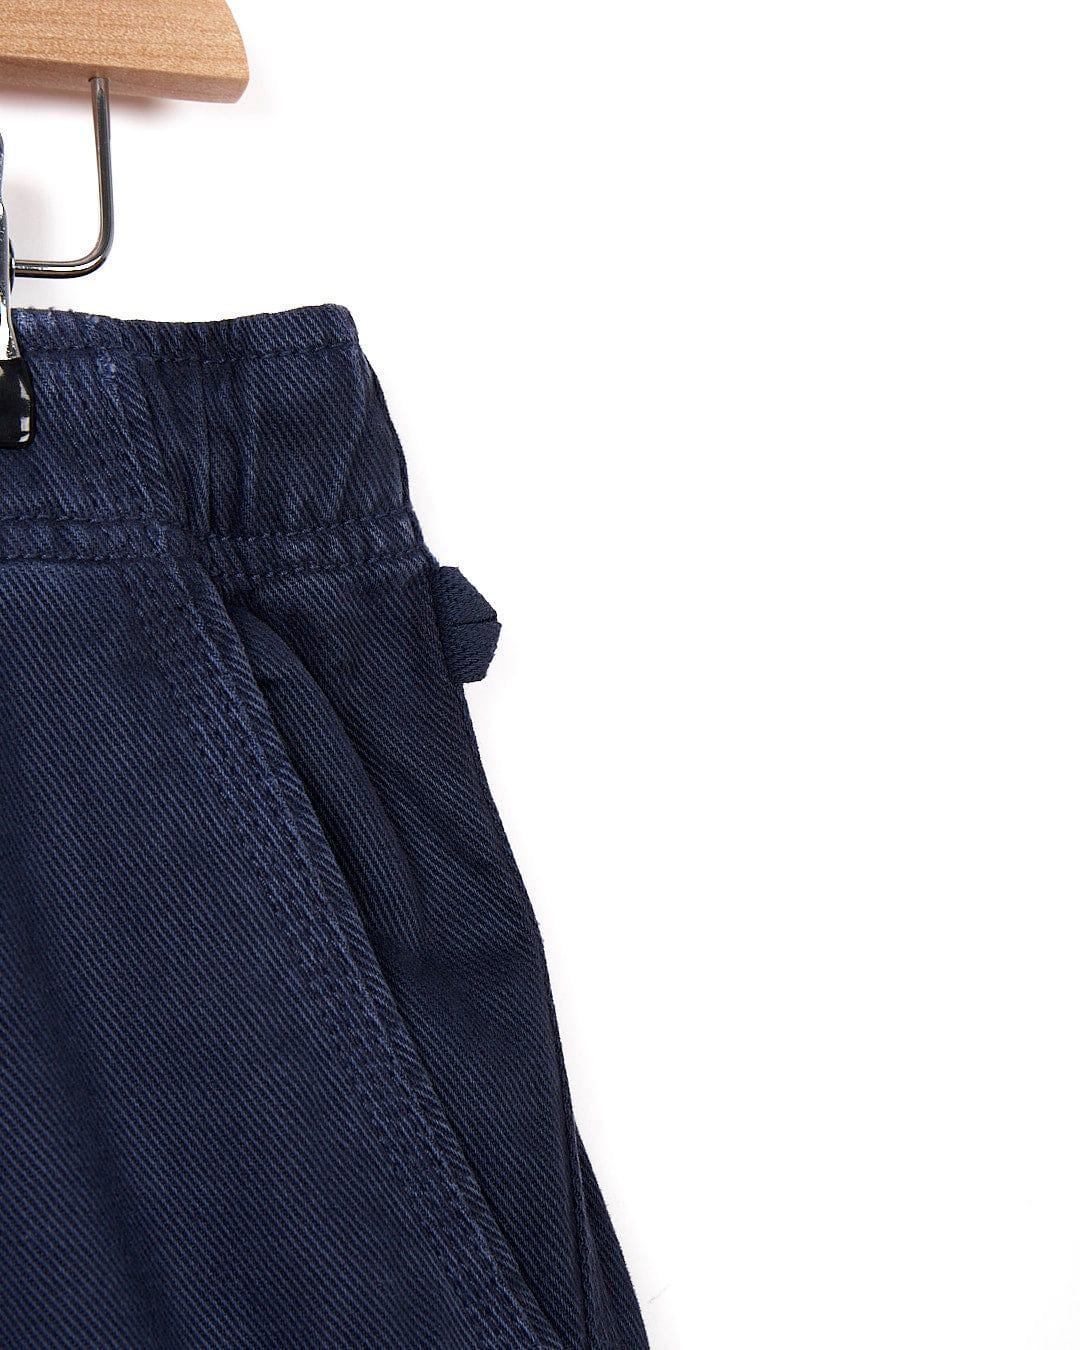 A pair of Meddon - Mens Twill Trouser - Navy shorts hanging on a hanger.